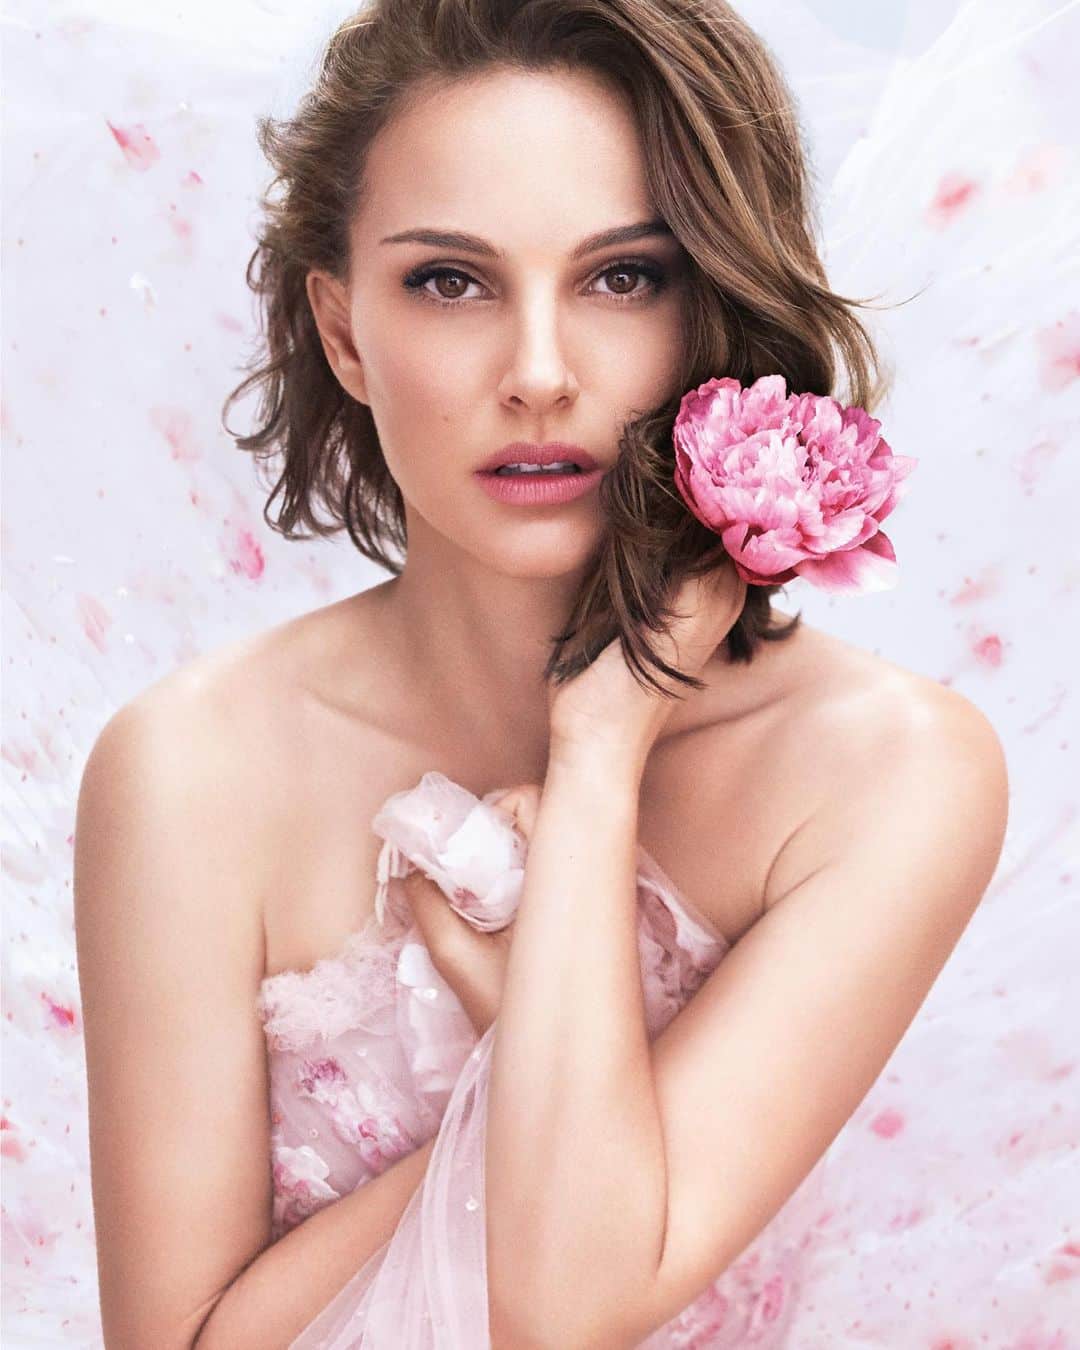 Natalie Portman - Biography, Profile, Facts and Career